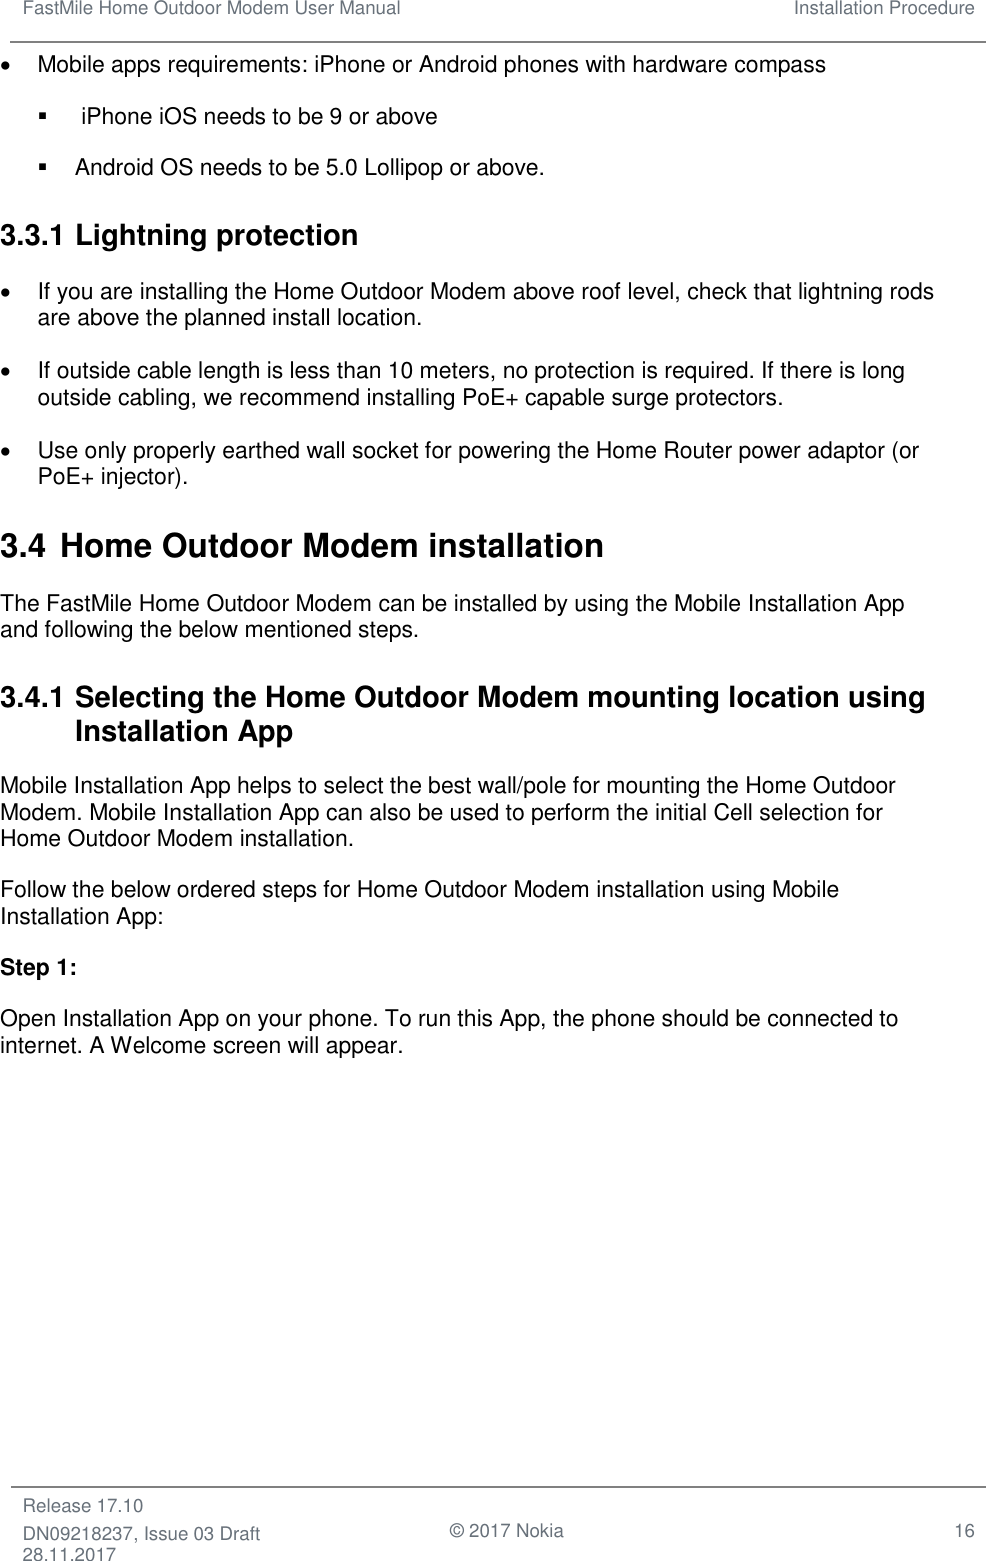 FastMile Home Outdoor Modem User Manual Installation Procedure  Release 17.10 DN09218237, Issue 03 Draft 28.11.2017                                © 2017 Nokia 16  •  Mobile apps requirements: iPhone or Android phones with hardware compass ▪   iPhone iOS needs to be 9 or above ▪  Android OS needs to be 5.0 Lollipop or above. 3.3.1 Lightning protection •  If you are installing the Home Outdoor Modem above roof level, check that lightning rods are above the planned install location. •  If outside cable length is less than 10 meters, no protection is required. If there is long outside cabling, we recommend installing PoE+ capable surge protectors. •  Use only properly earthed wall socket for powering the Home Router power adaptor (or PoE+ injector).  3.4 Home Outdoor Modem installation The FastMile Home Outdoor Modem can be installed by using the Mobile Installation App and following the below mentioned steps. 3.4.1 Selecting the Home Outdoor Modem mounting location using Installation App Mobile Installation App helps to select the best wall/pole for mounting the Home Outdoor Modem. Mobile Installation App can also be used to perform the initial Cell selection for Home Outdoor Modem installation. Follow the below ordered steps for Home Outdoor Modem installation using Mobile Installation App: Step 1:  Open Installation App on your phone. To run this App, the phone should be connected to internet. A Welcome screen will appear. 